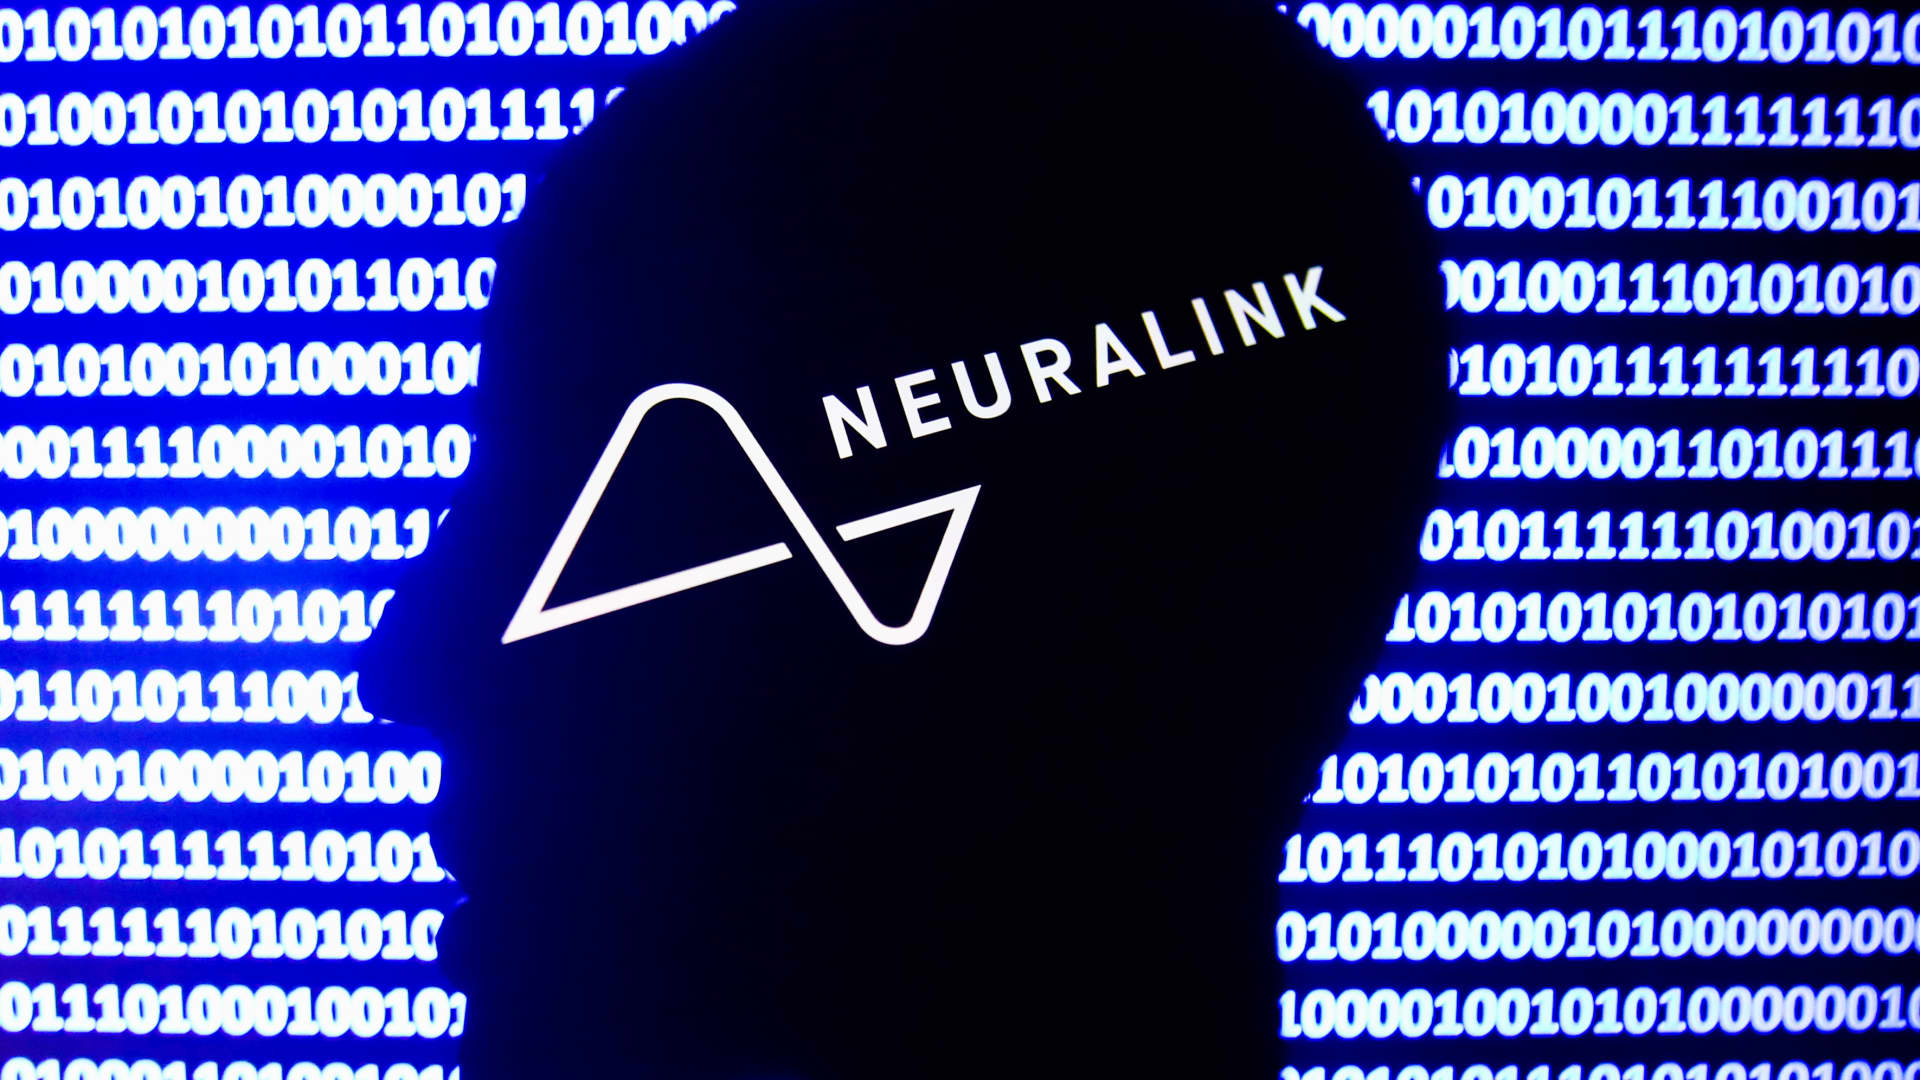 Elon Musk’s Neuralink gets FDA approval for in-human study